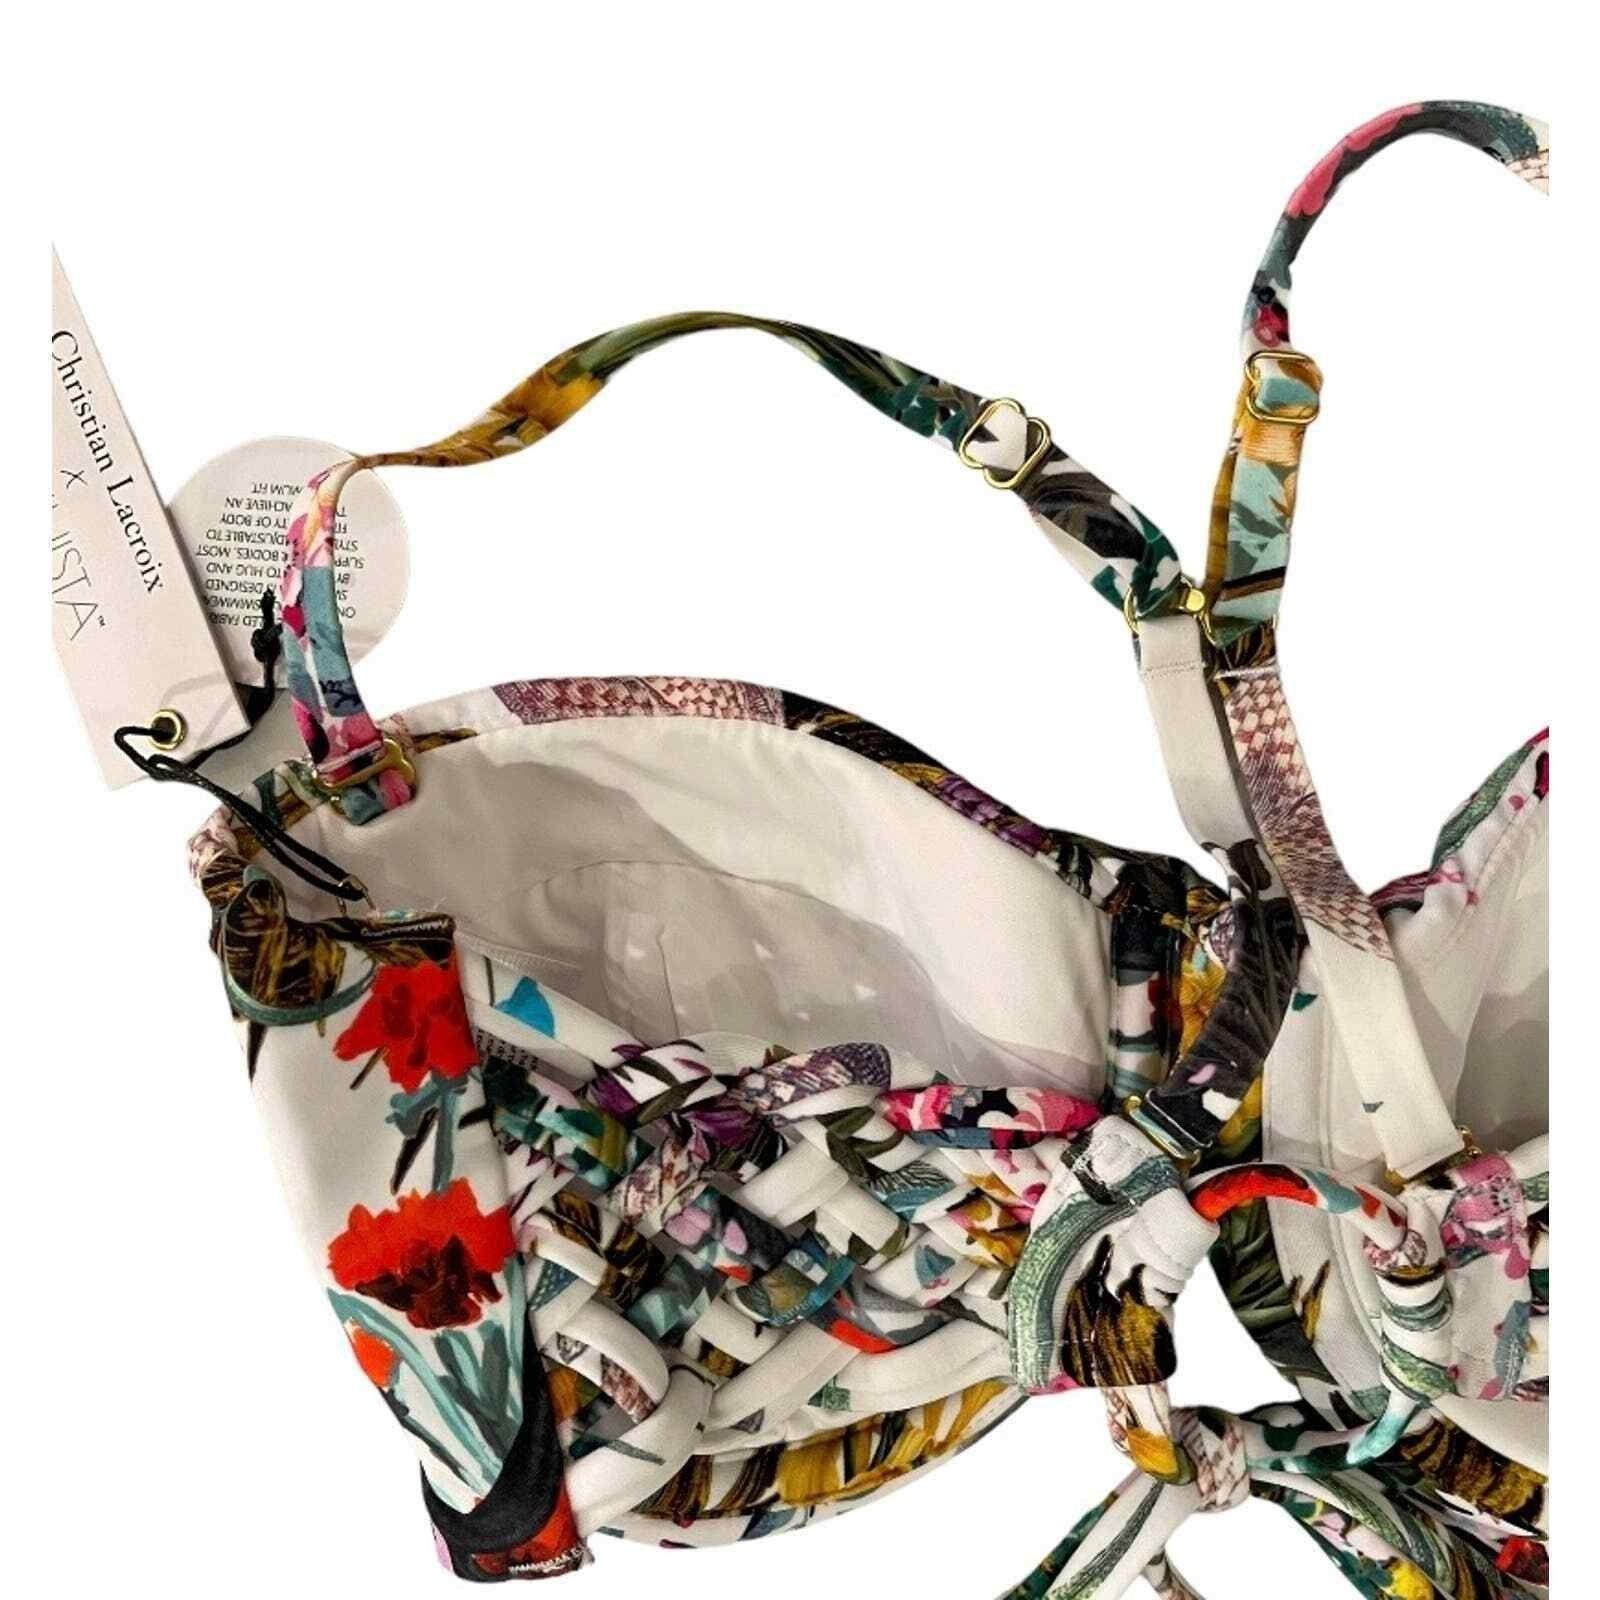 Swiminista Christian Lacroix Joy Bikini Top & Classy Bottom Swimsuit M/L - Premium Clothing, Shoes & Accessories:Baby:Baby & Toddler Clothing:Bottoms from Christian Lacroix - Just $95.00! Shop now at Finds For You